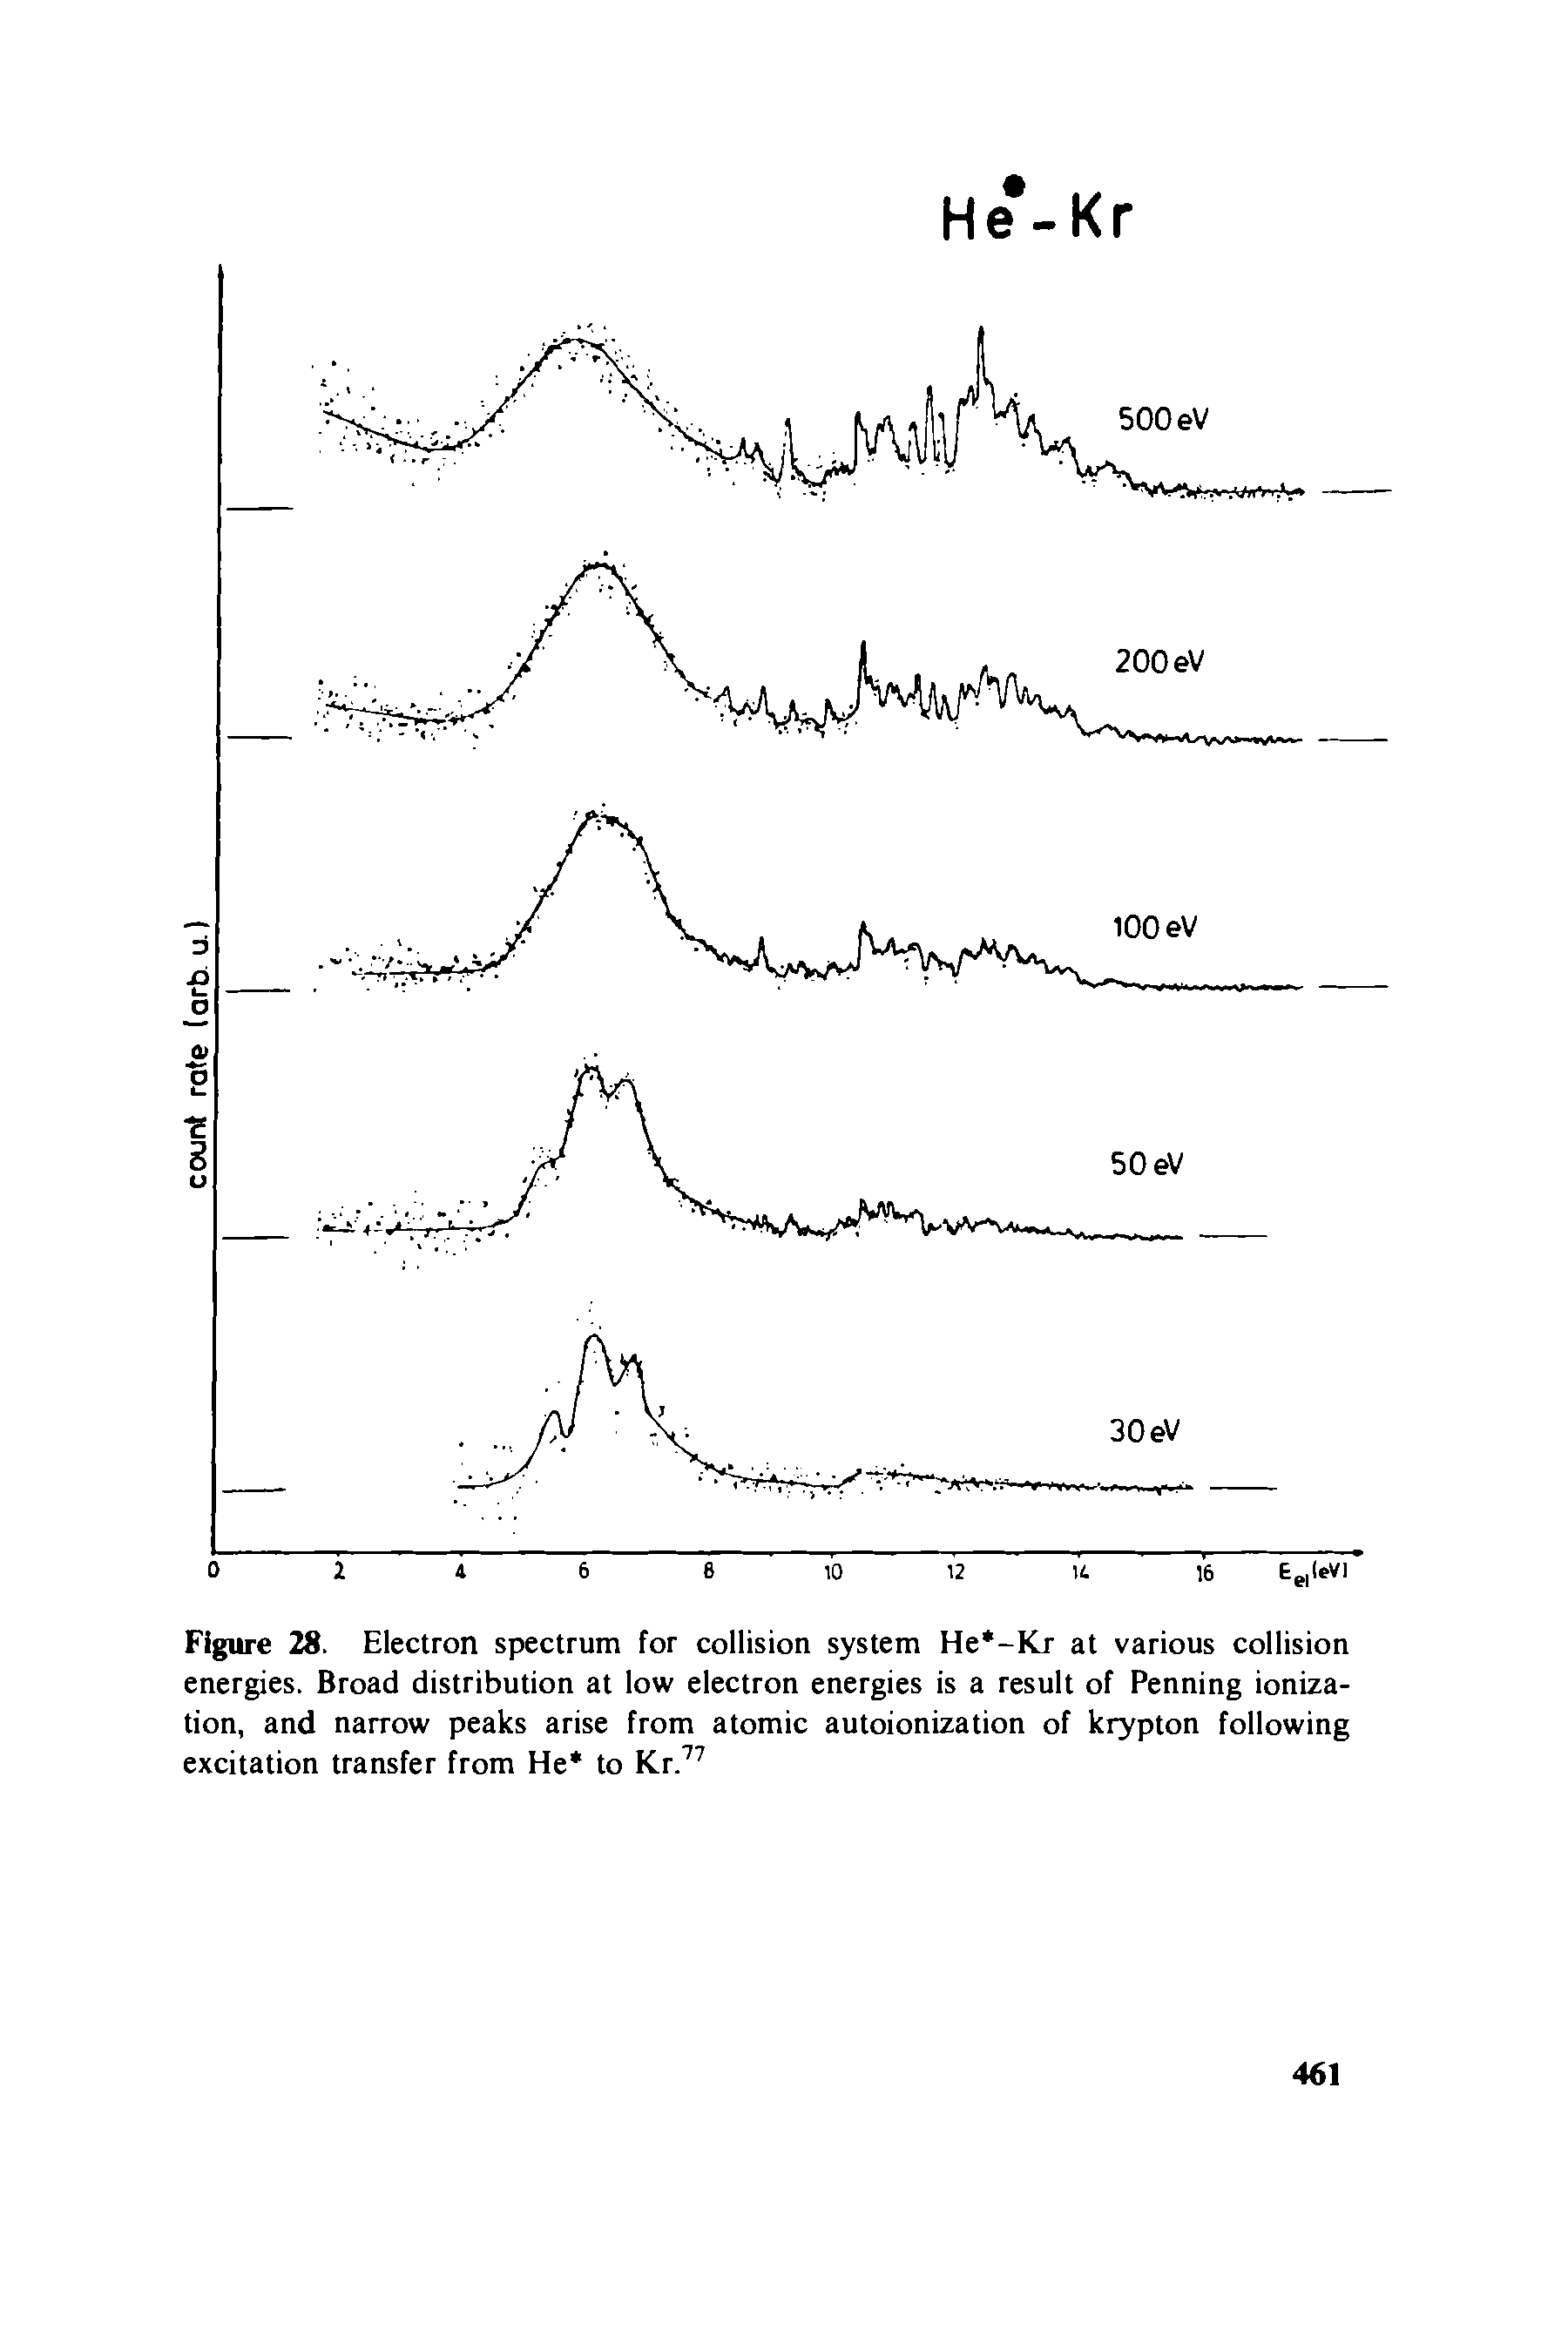 Figure 28. Electron spectrum for collision system He -Kr at various collision energies. Broad distribution at low electron energies is a result of Penning ionization, and narrow peaks arise from atomic autoionization of krypton following excitation transfer from He to Kr.77...